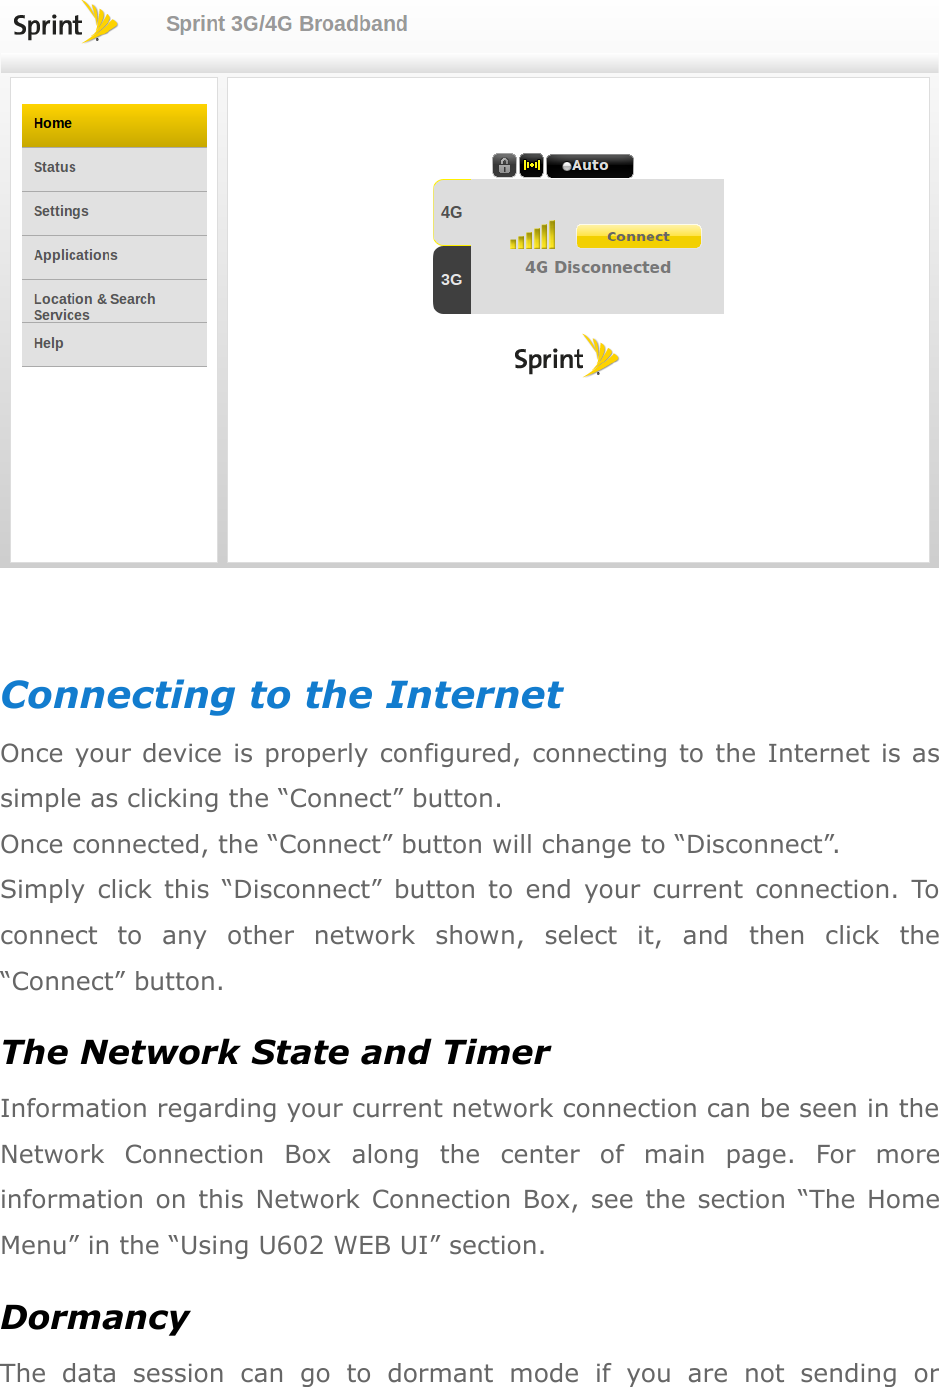   Connecting to the Internet Once your device is properly configured, connecting to the Internet is as simple as clicking the “Connect” button. Once connected, the “Connect” button will change to “Disconnect”.   Simply  click  this  “Disconnect”  button  to  end  your  current  connection.  To connect  to  any  other  network  shown,  select  it,  and  then  click  the “Connect” button. The Network State and Timer Information regarding your current network connection can be seen in the Network  Connection  Box  along  the  center  of  main  page.  For  more information on  this  Network Connection Box, see  the  section  “The Home Menu” in the “Using U602 WEB UI” section. Dormancy The  data  session  can  go  to  dormant  mode  if  you  are  not  sending  or 